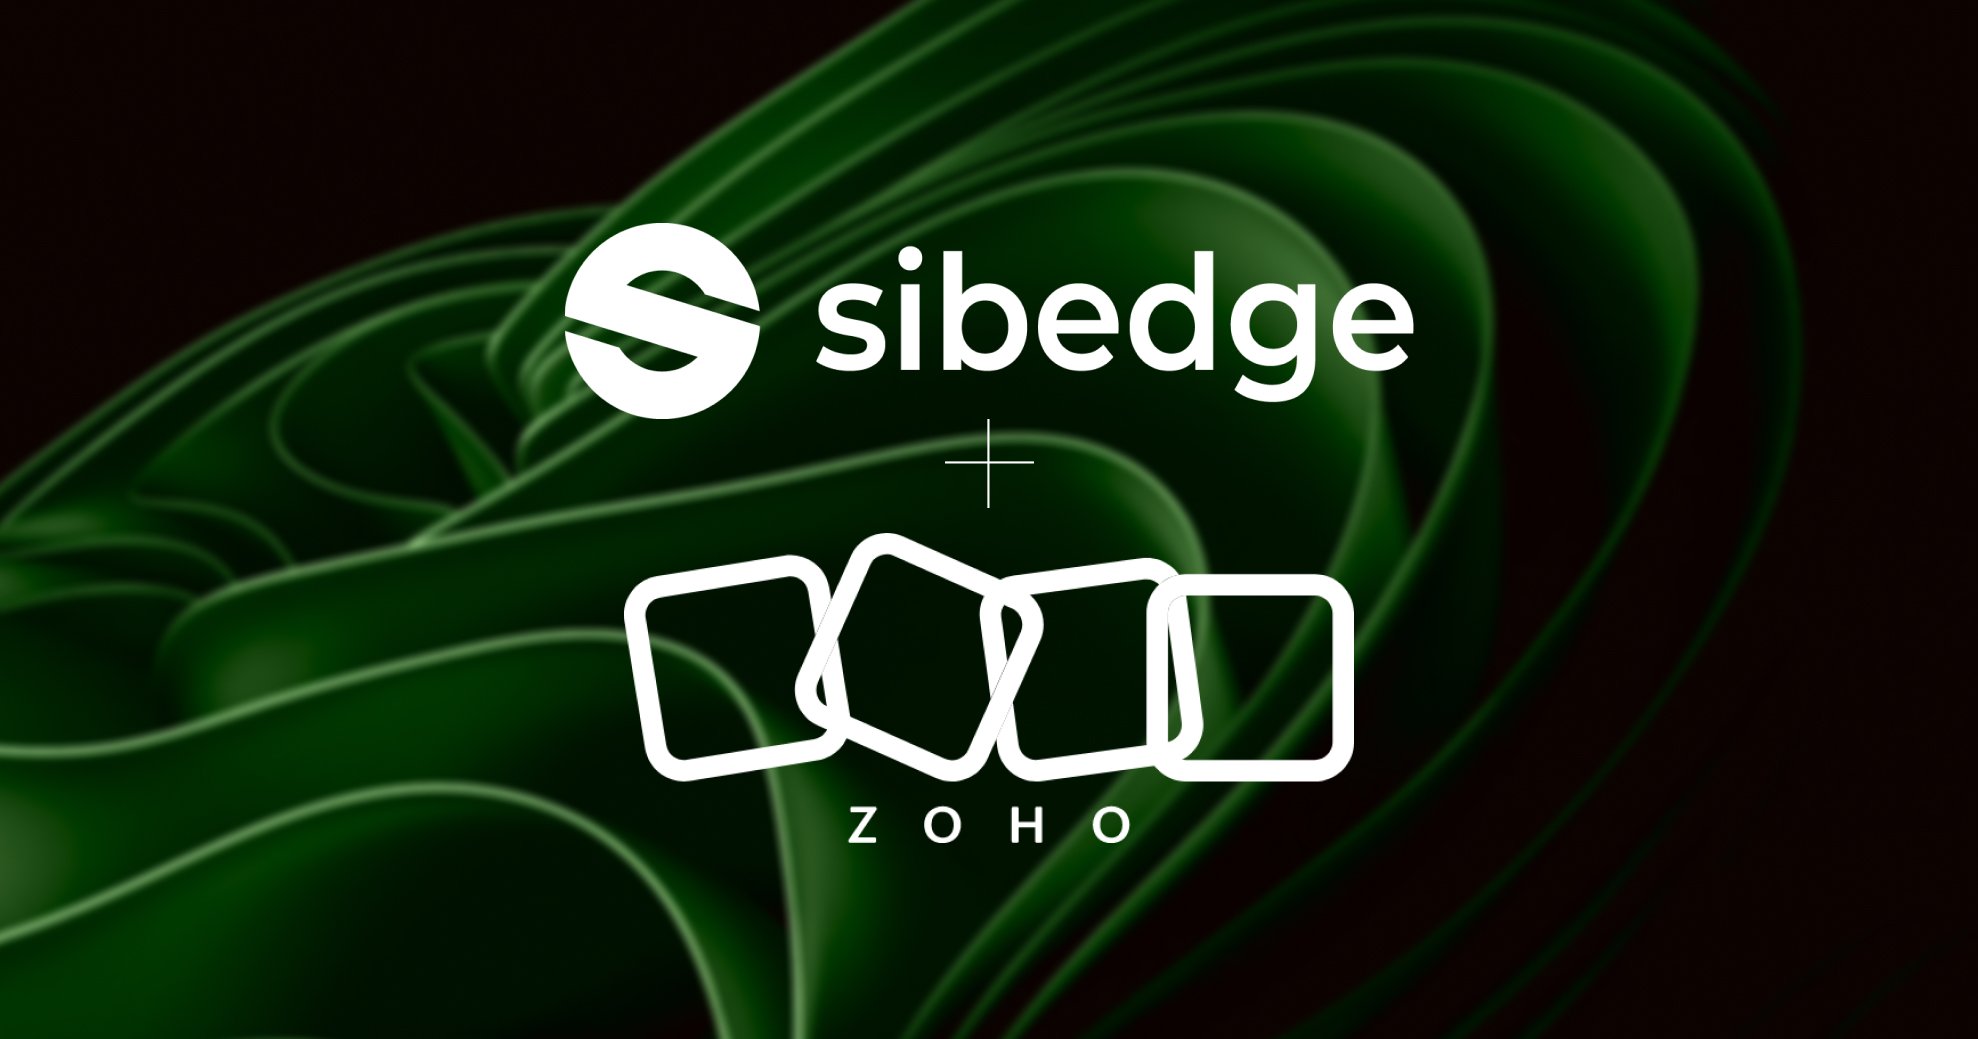 Zoho and Sibedge: a proud 6 years longstanding partnership